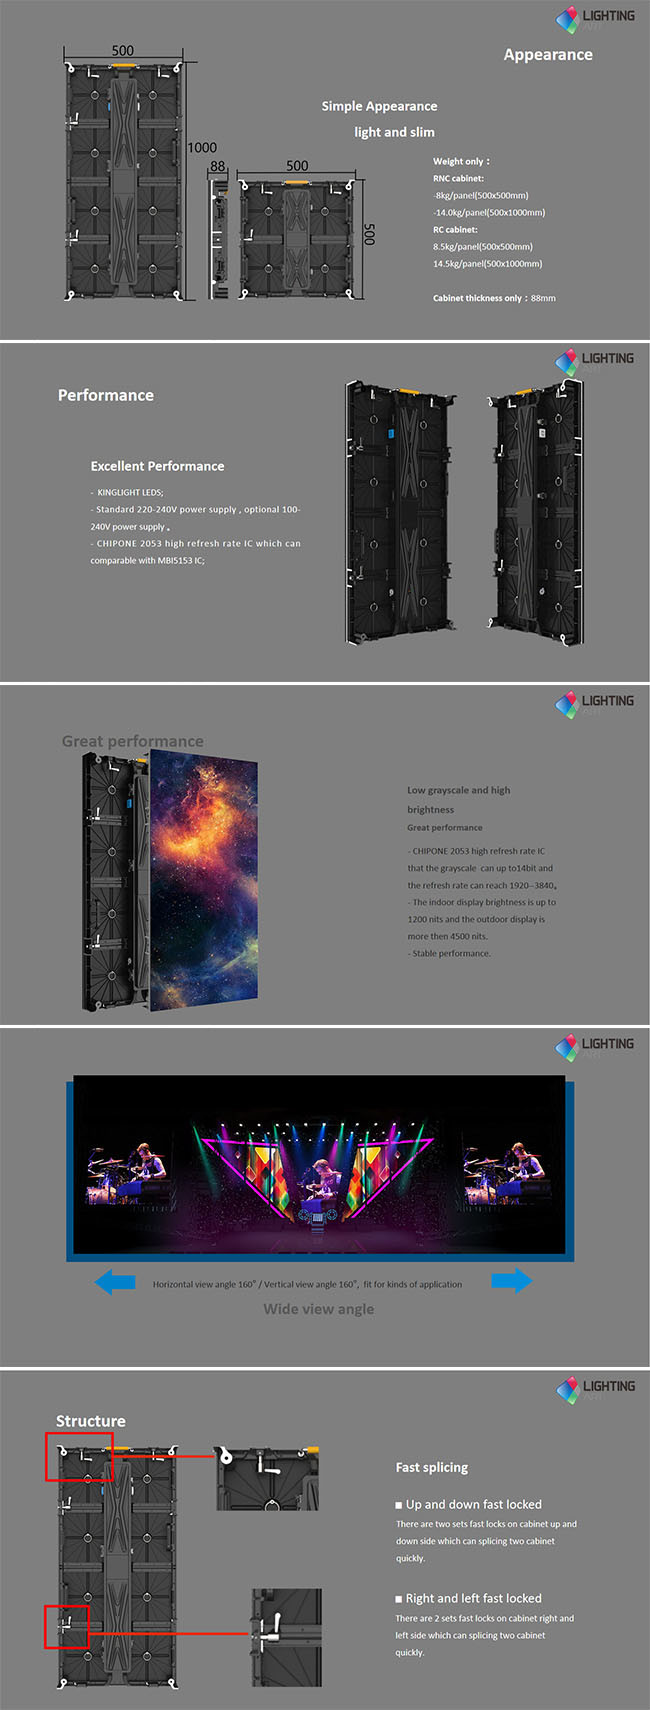 Hotsale Competitive Price Rental Using Screen LED Display Full Color